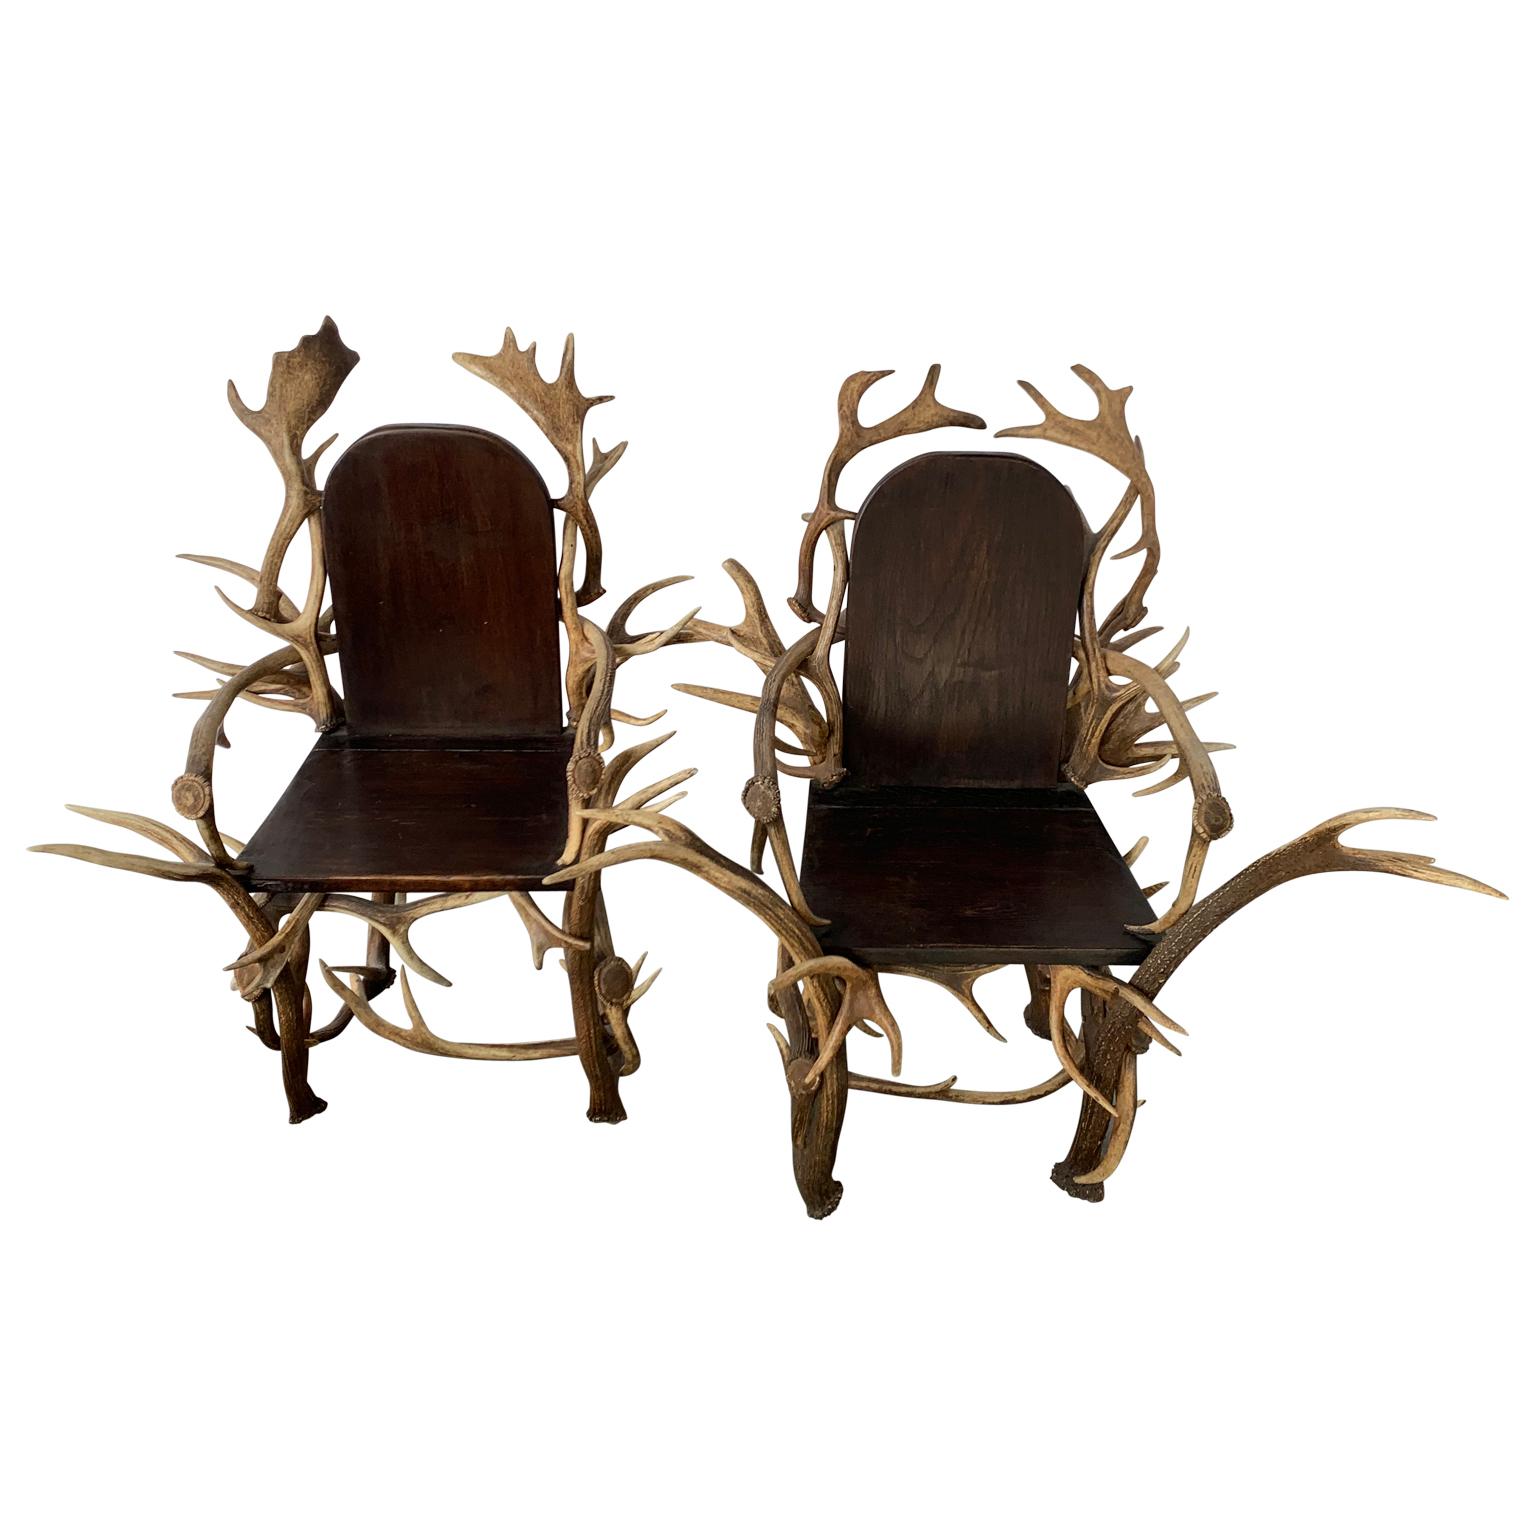 Pair of black forest antler armchairs, 1920s.

$250 flat rate front door delivery includes Washington DC metro, Baltimore and Philadelphia.